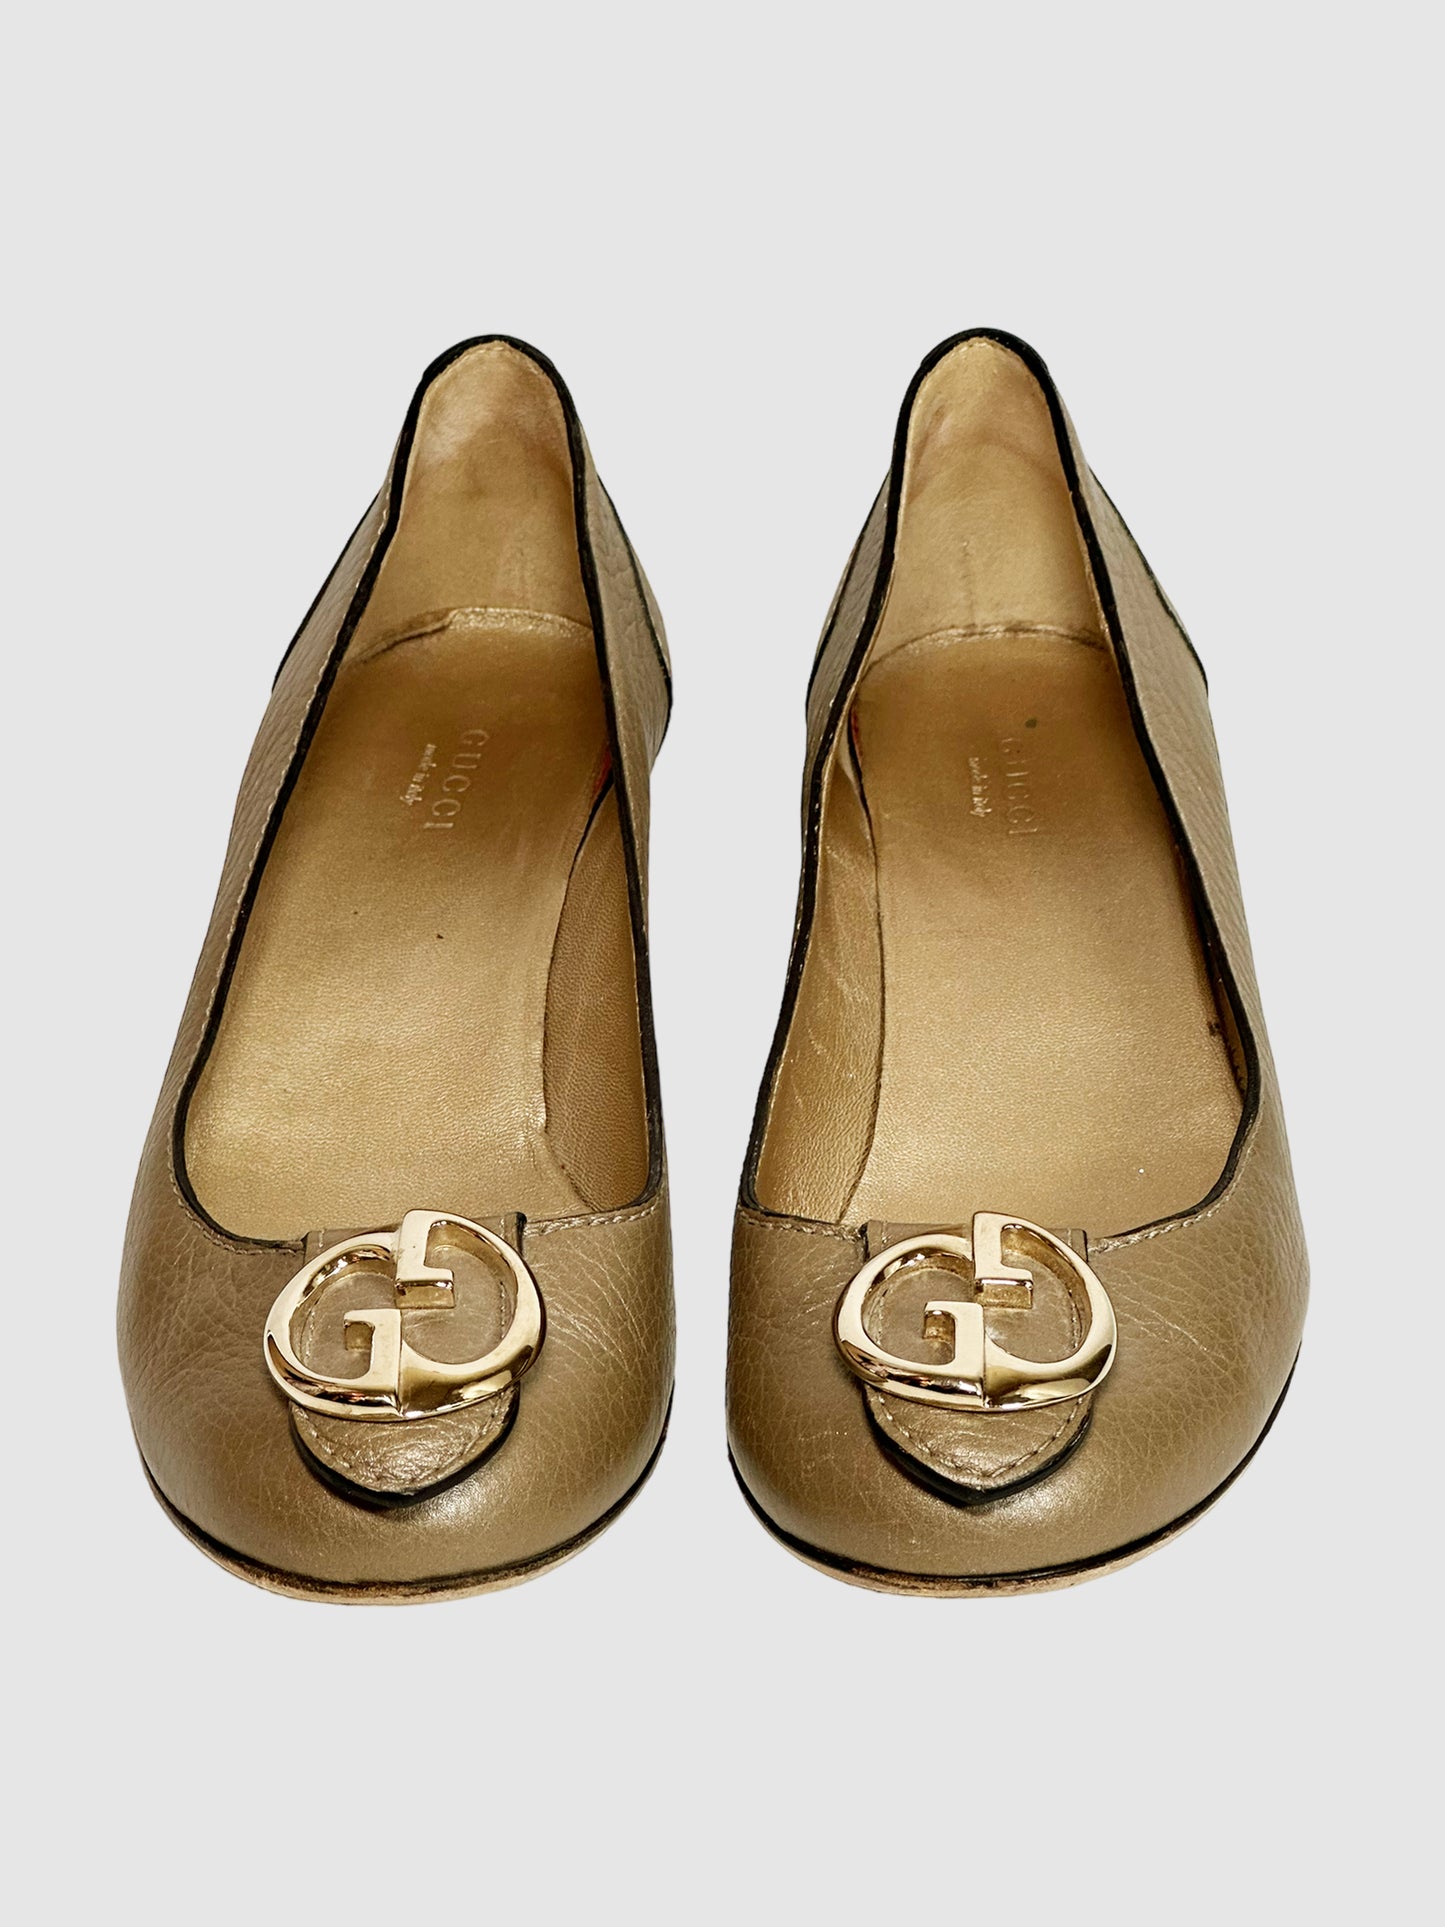 GG Buckle Leather Pumps - Size 37.5